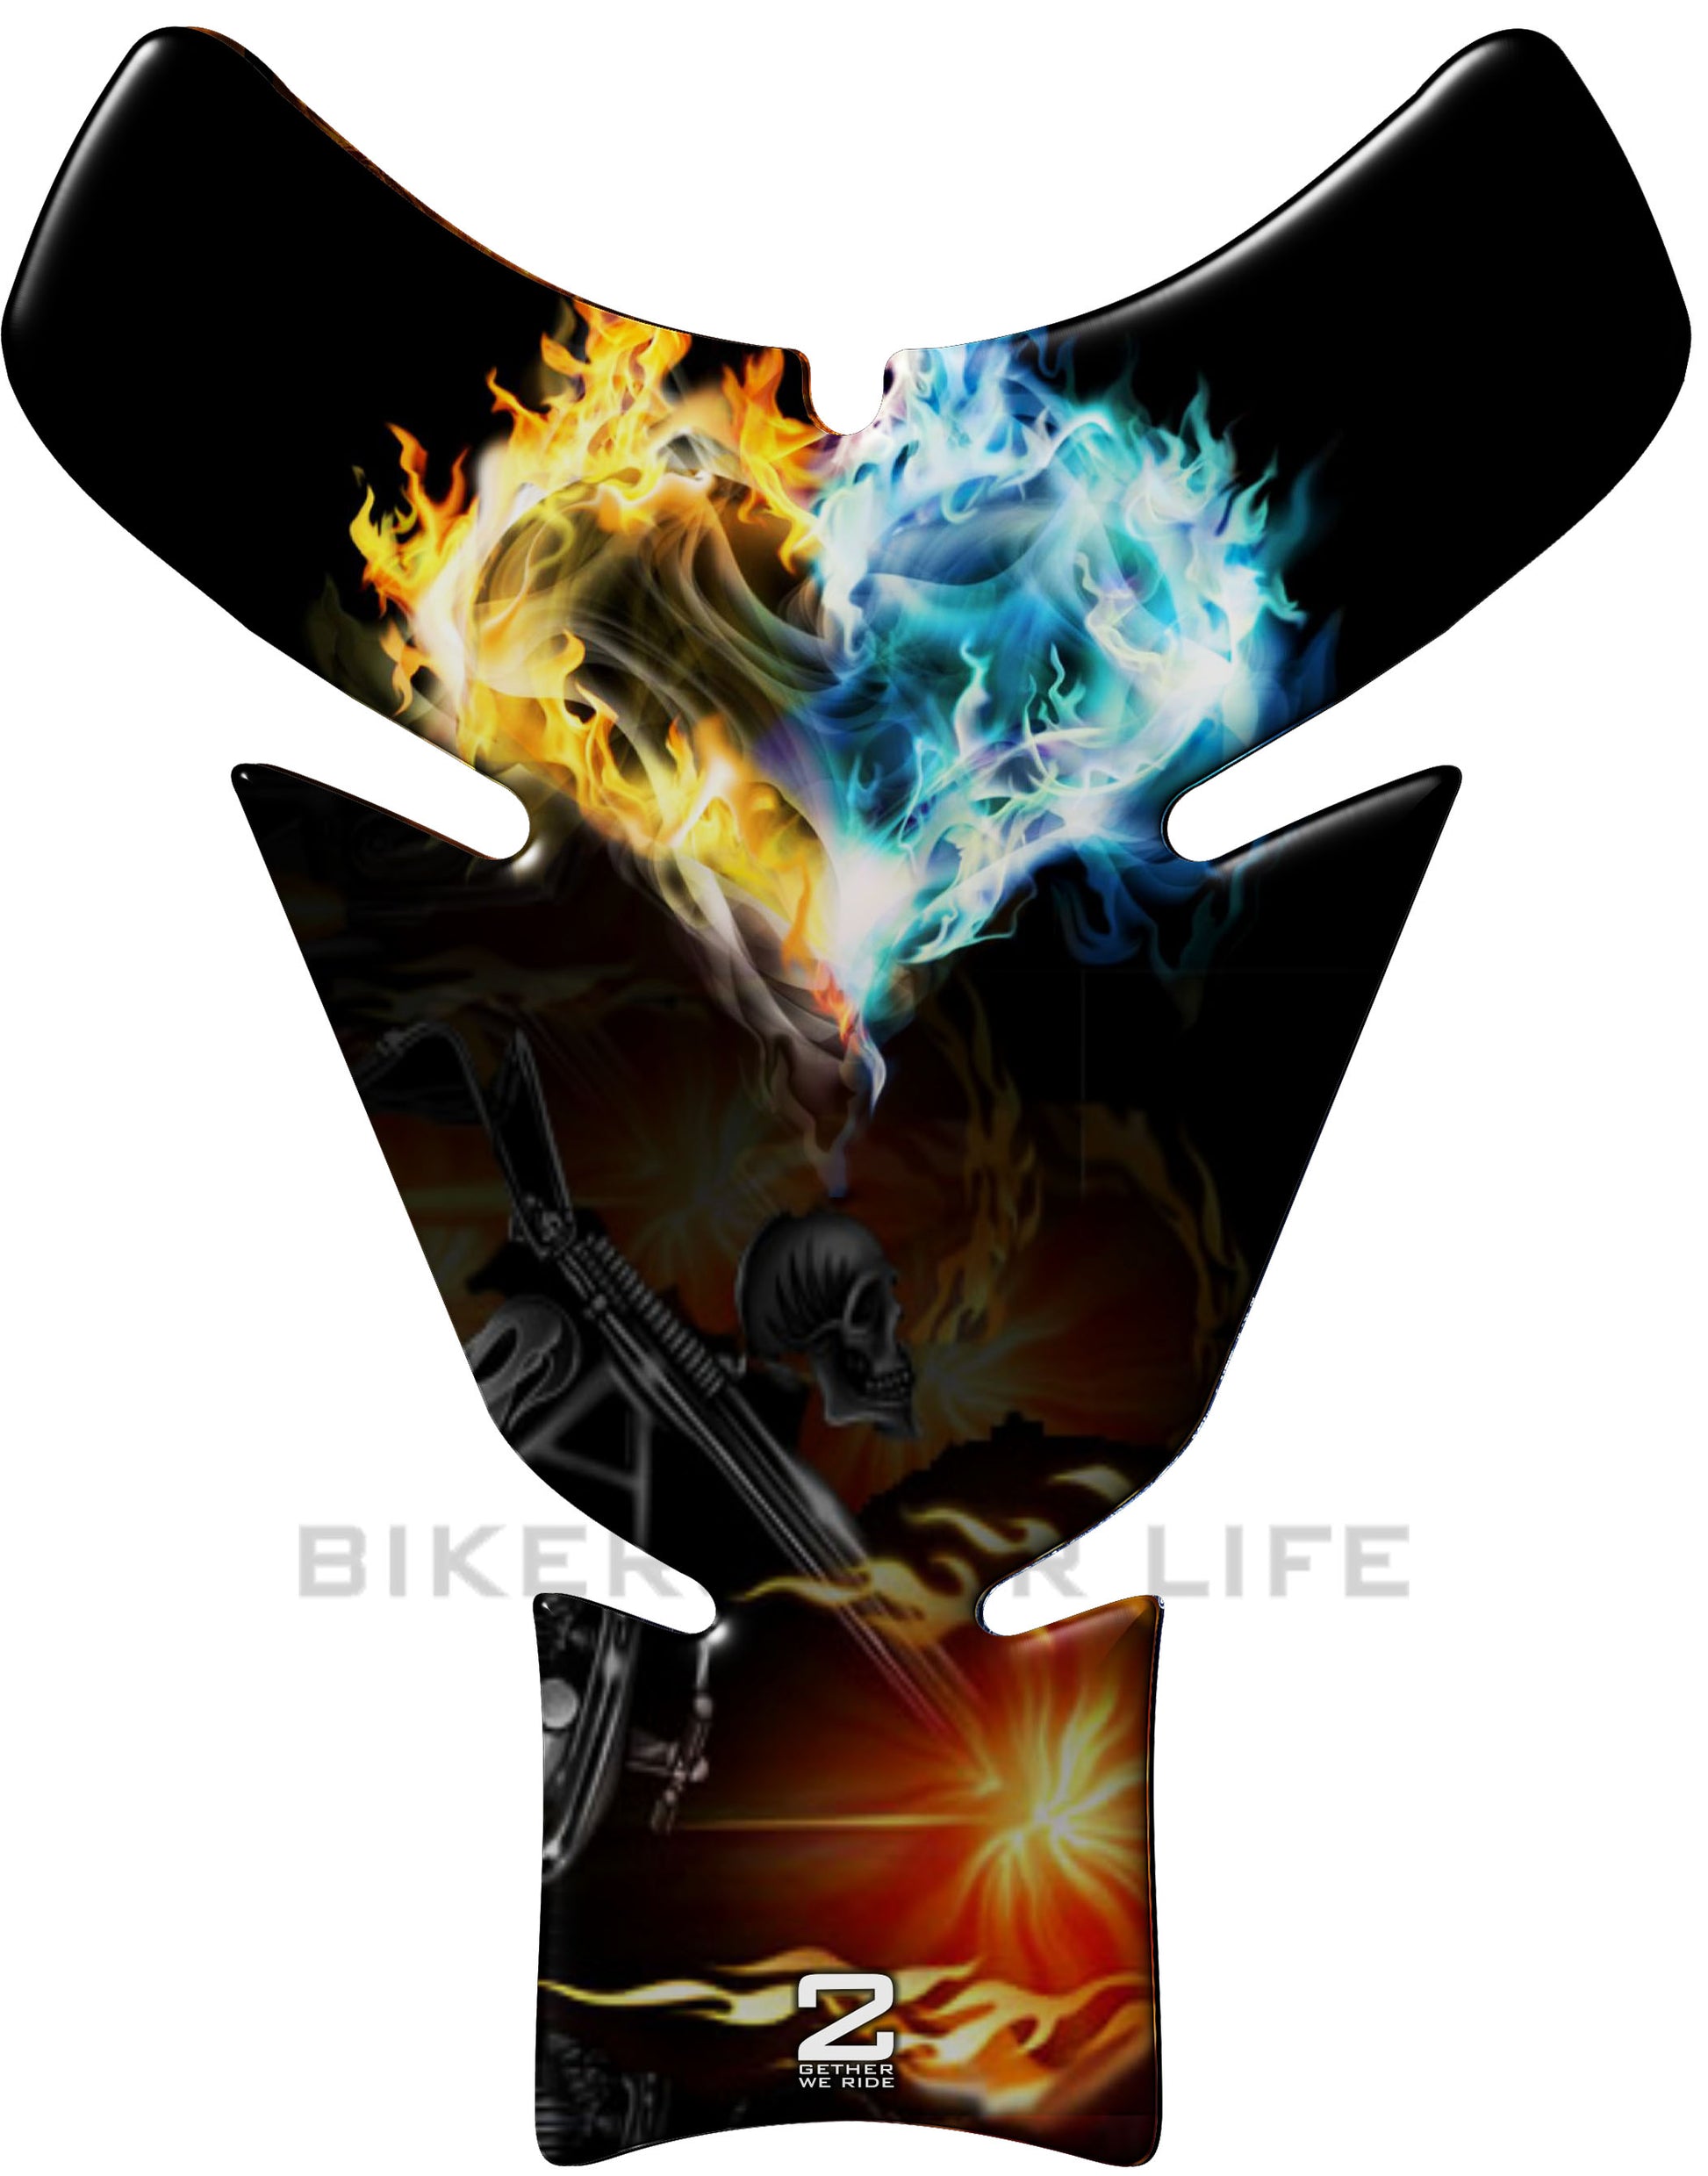 Universal Fit Fire and Ice Heart breaking Skull Motor Bike Tank Pad Protector. A Street Pad which fits most motorcycles.